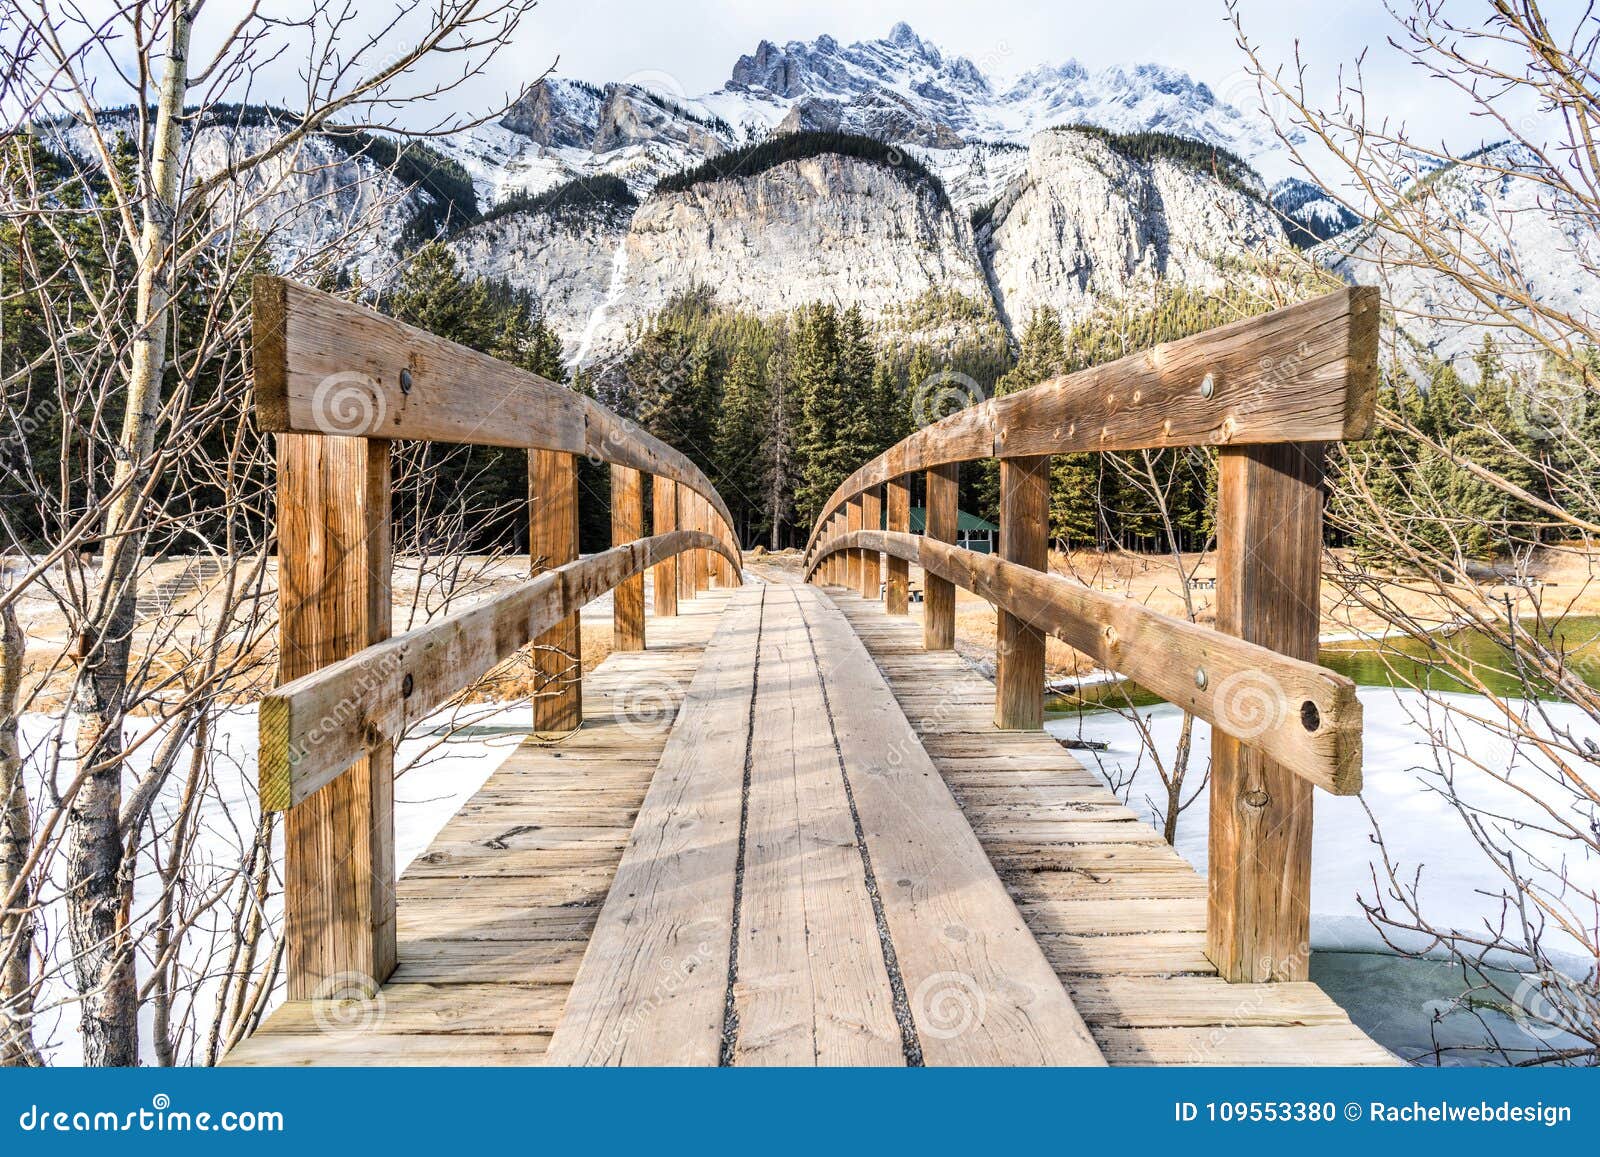 wooden foot bridge leading over glacial stream to inspiring winter mountains landscape